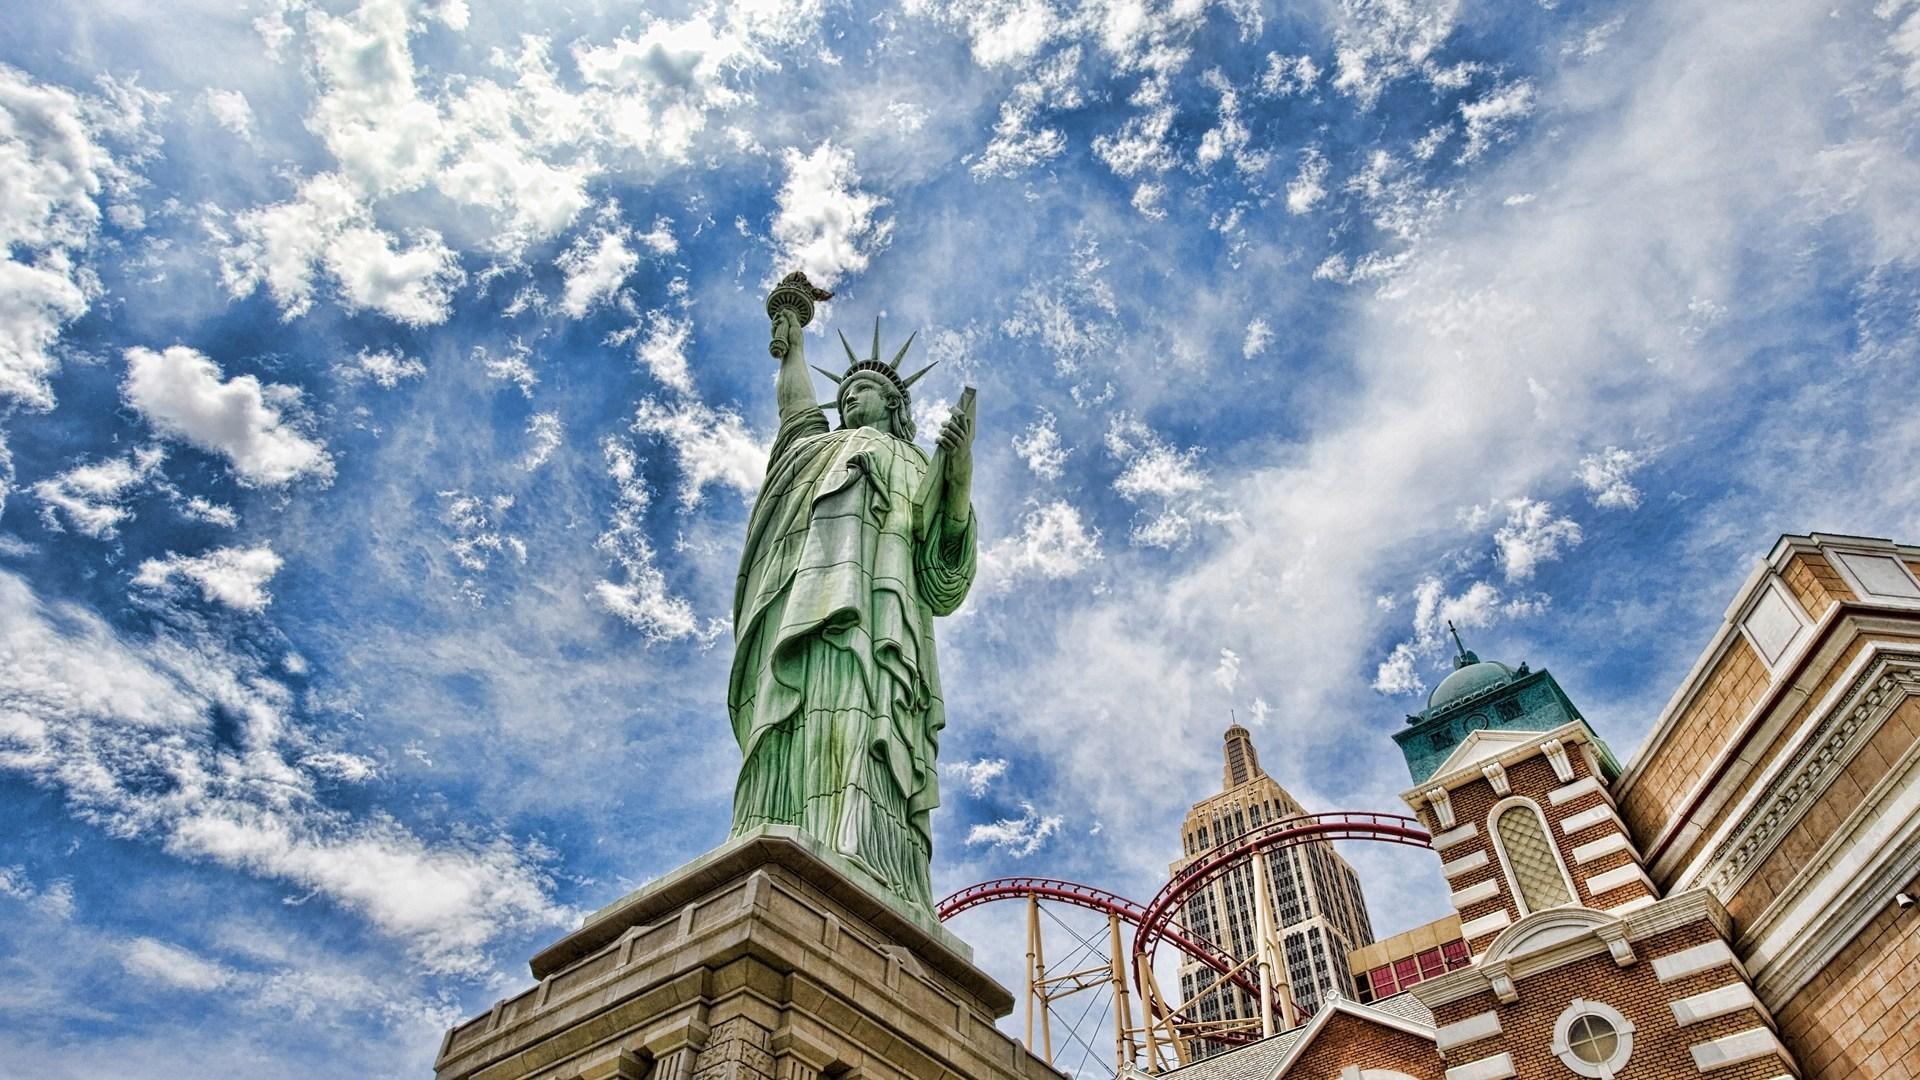 Statue of liberty New York United States of America wallpaper